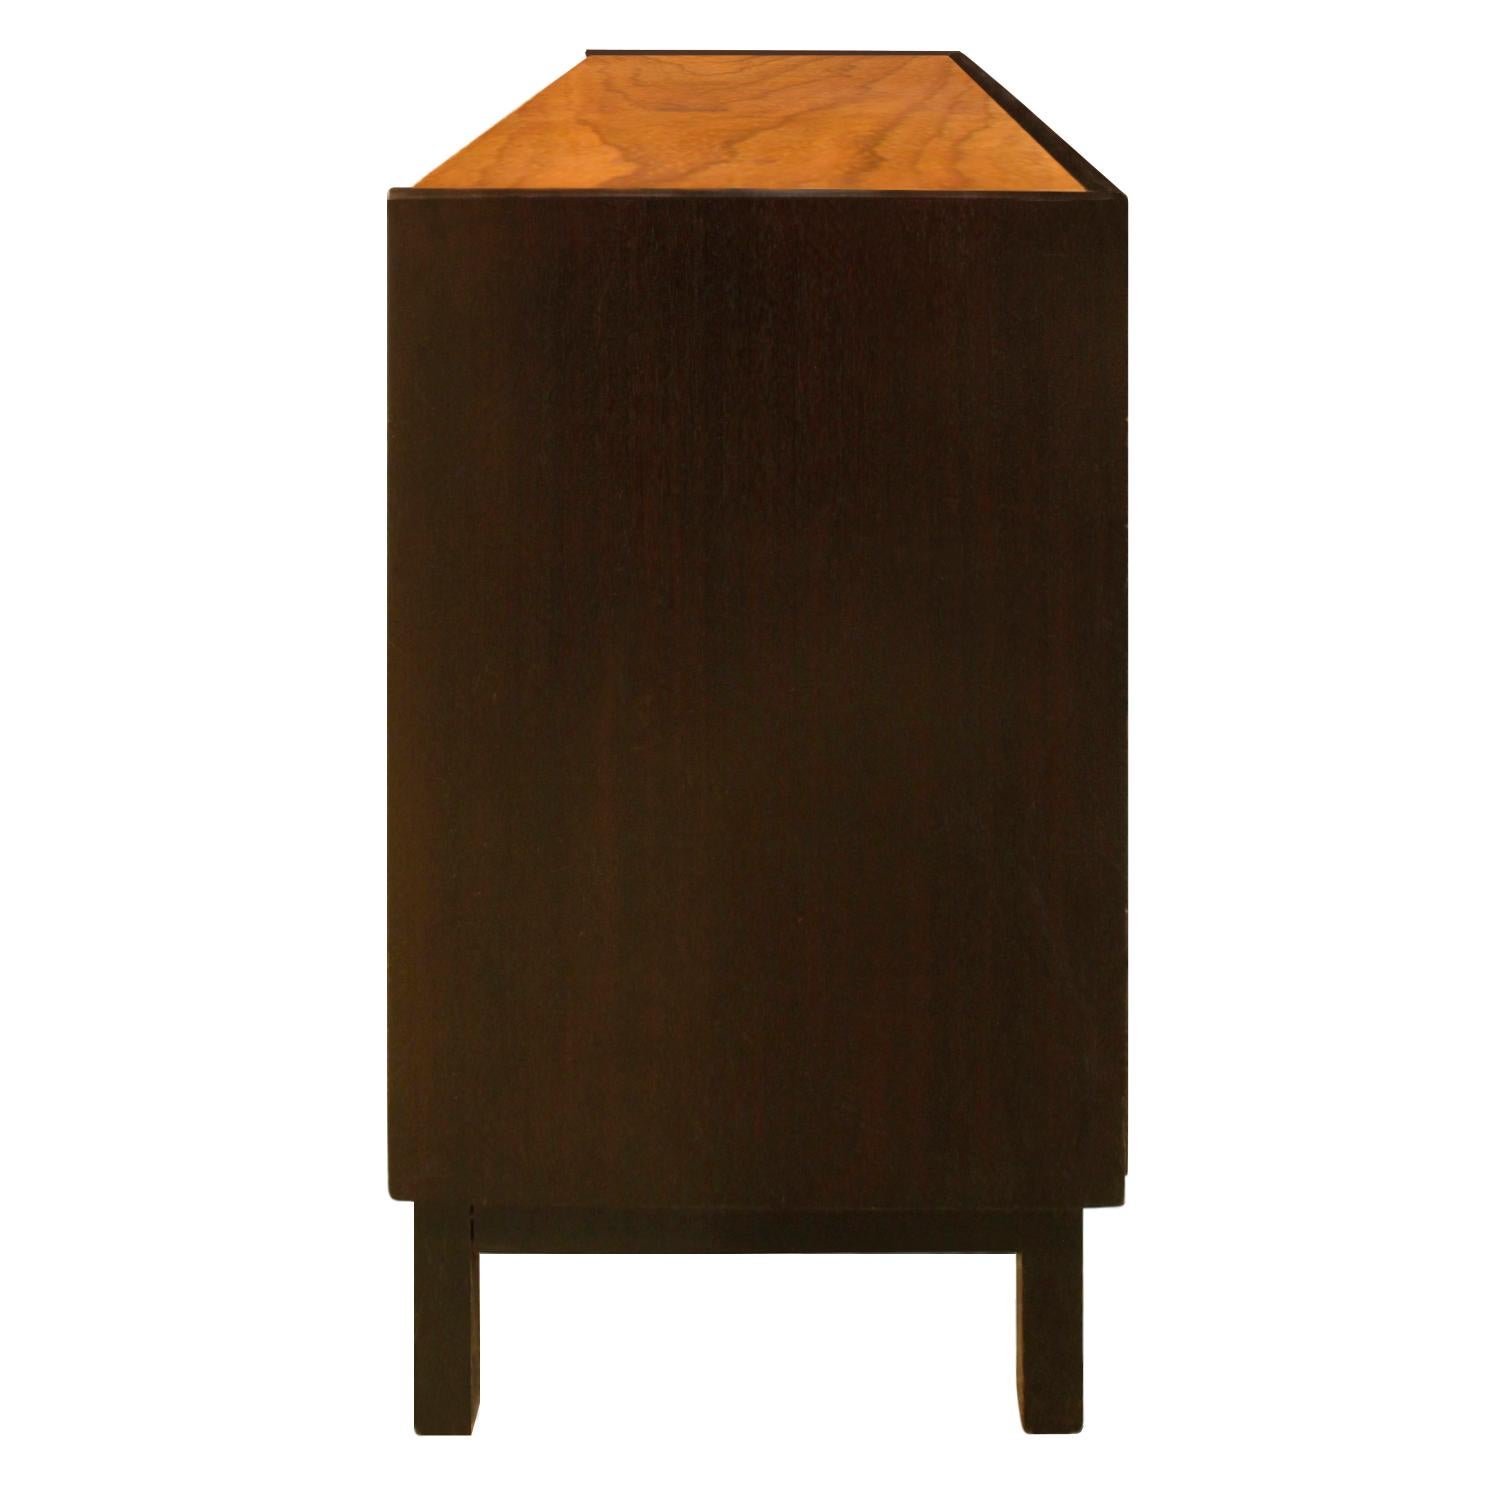 American Edward Wormley Pair of Bedside Tables/Chests in Teak and Mahogany 1950s ‘Signed’